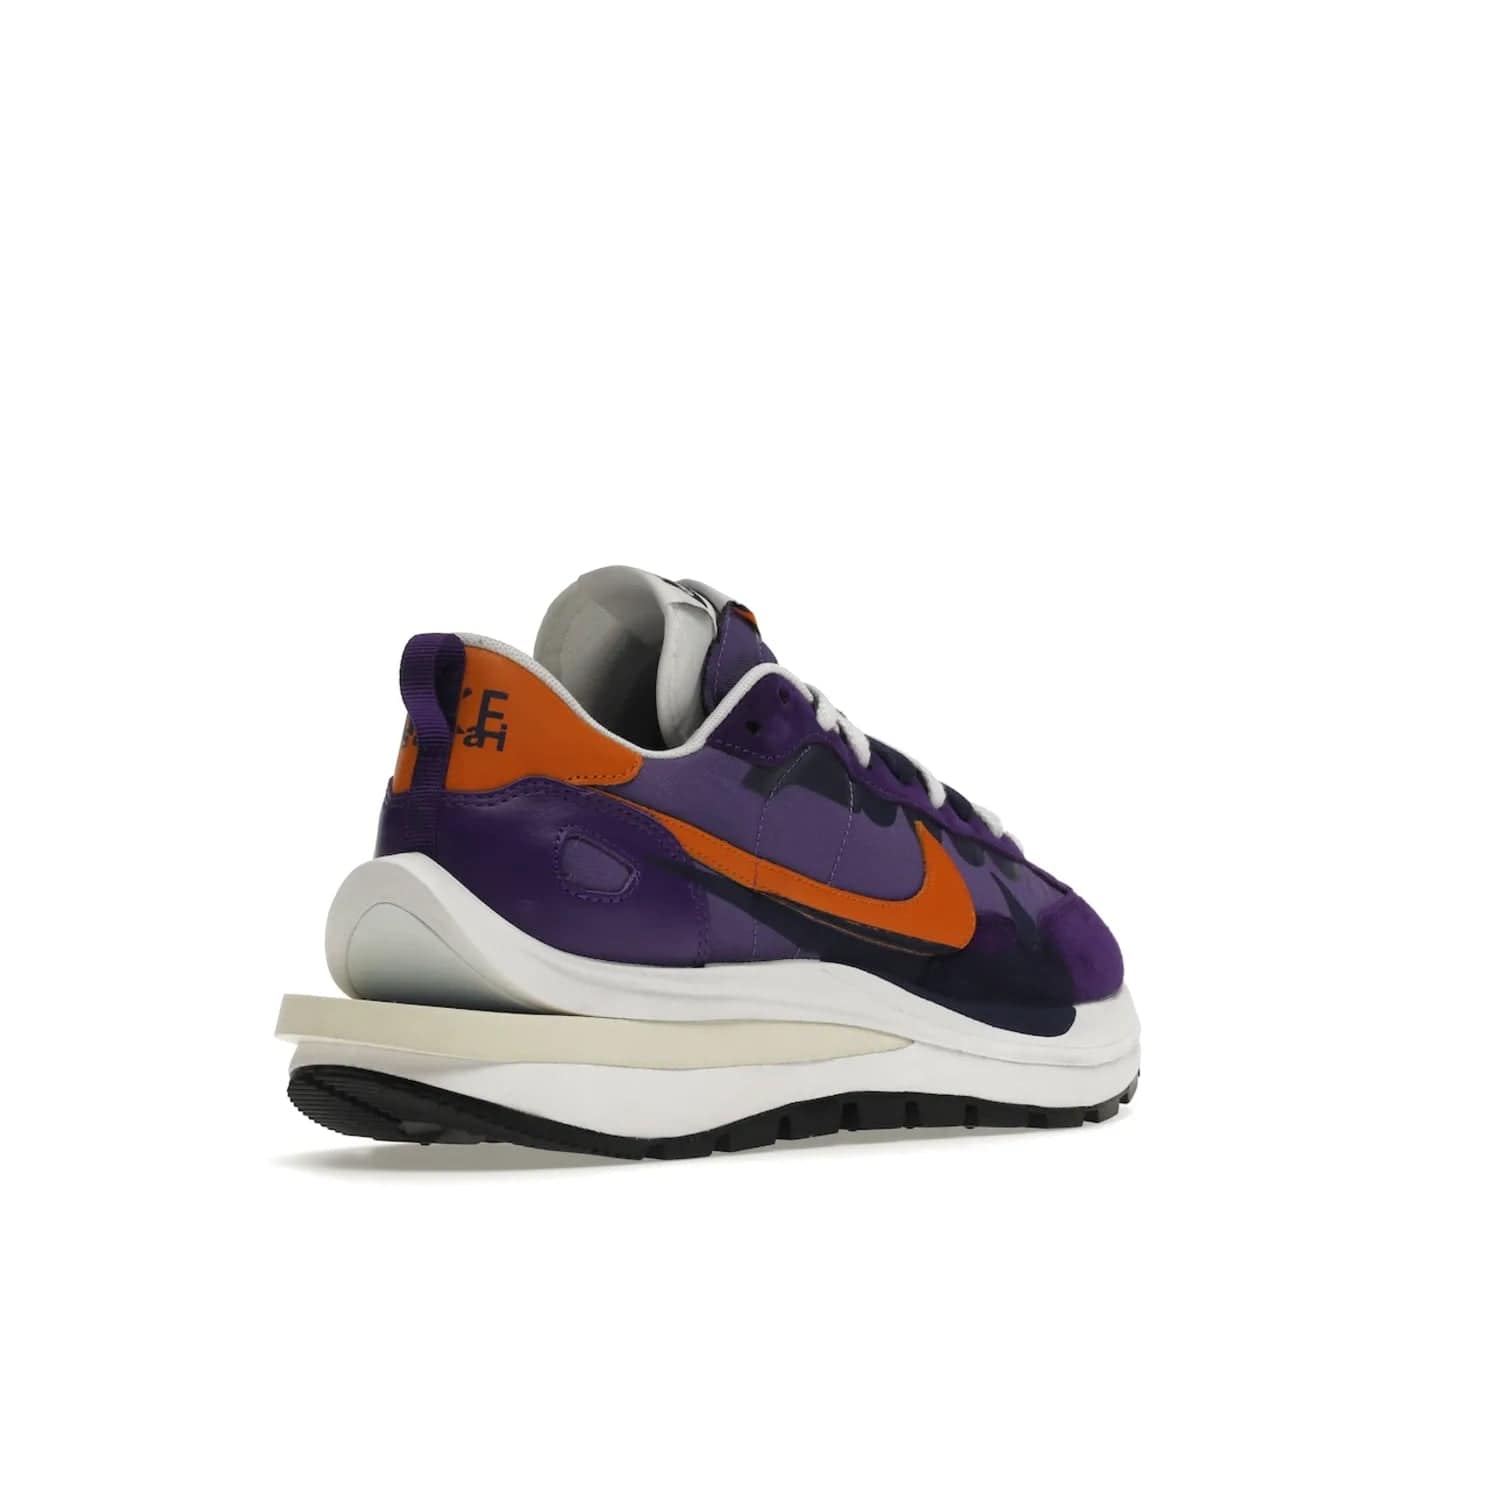 Nike Vaporwaffle sacai Dark Iris - Image 32 - Only at www.BallersClubKickz.com - Unique Nike Vaporwaffle sacai Dark Iris collab. Suede, leather & textile upper with Orange accents. Dual tongues & midsoles. Woven labels & heel tabs branding. Colorway of Purple, Orange, White & Black. Must-have for any wardrobe.